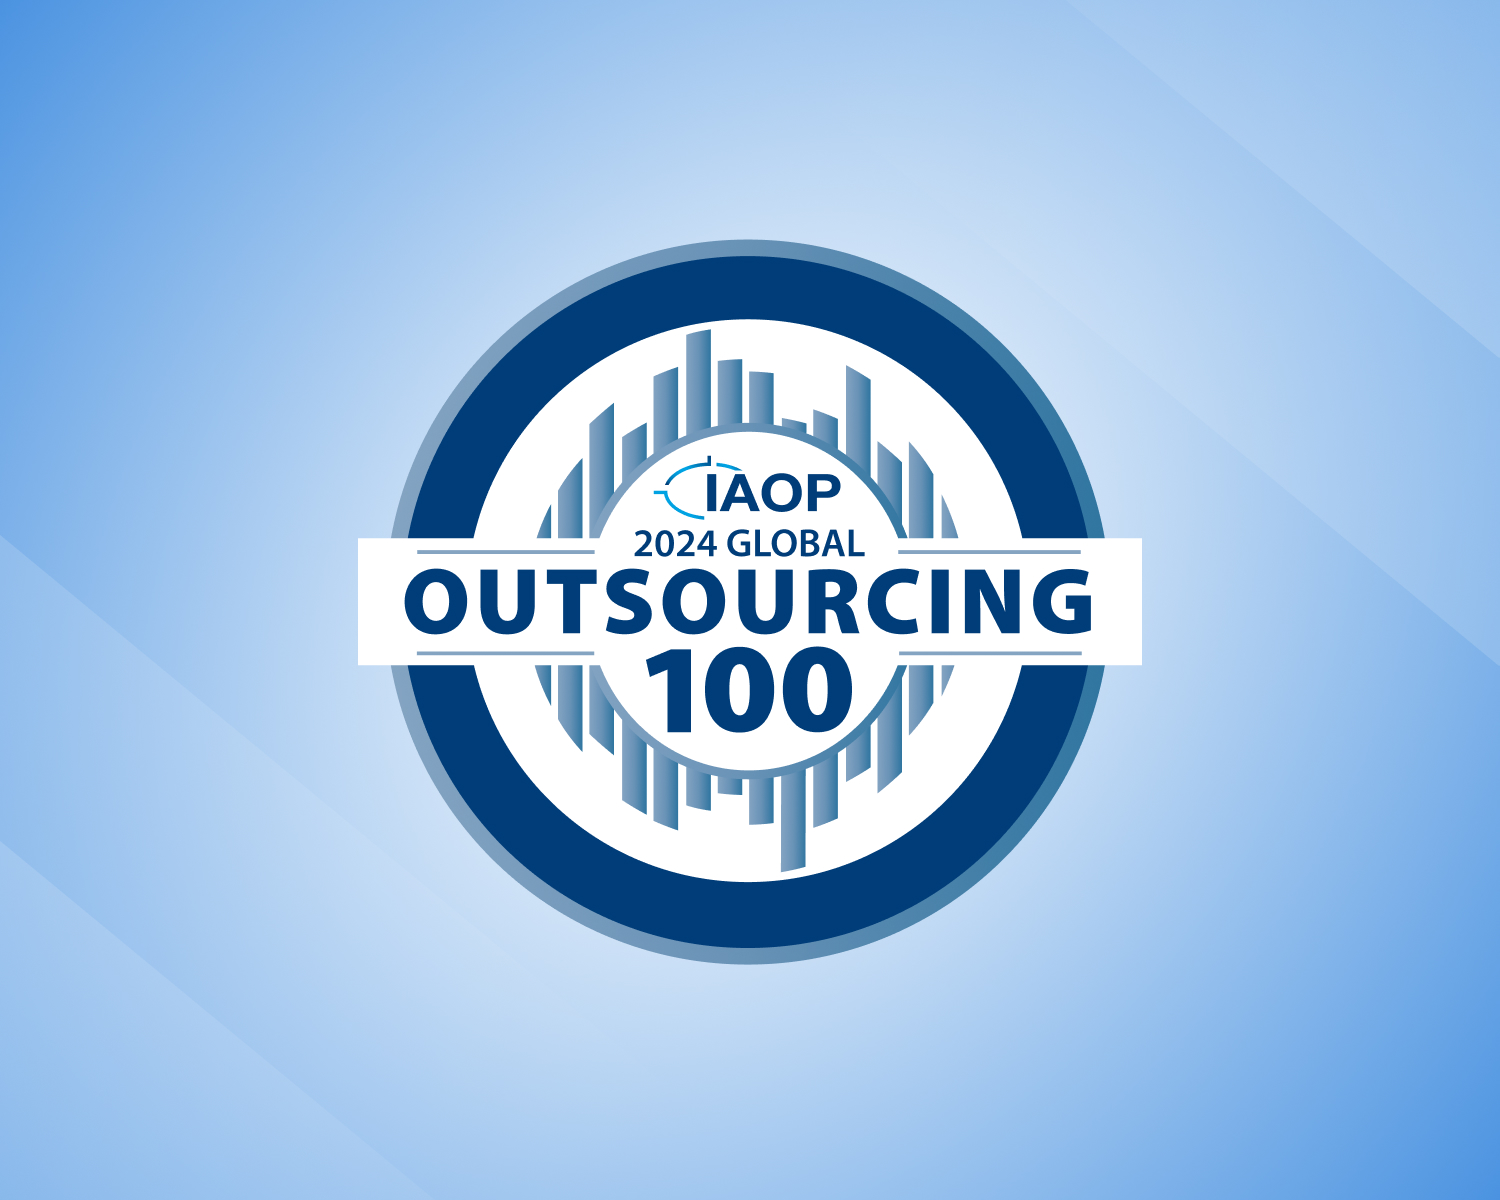 NIX Gets into IAOP’s Global Outsourcing 100 and Raises the Bar for Excellence